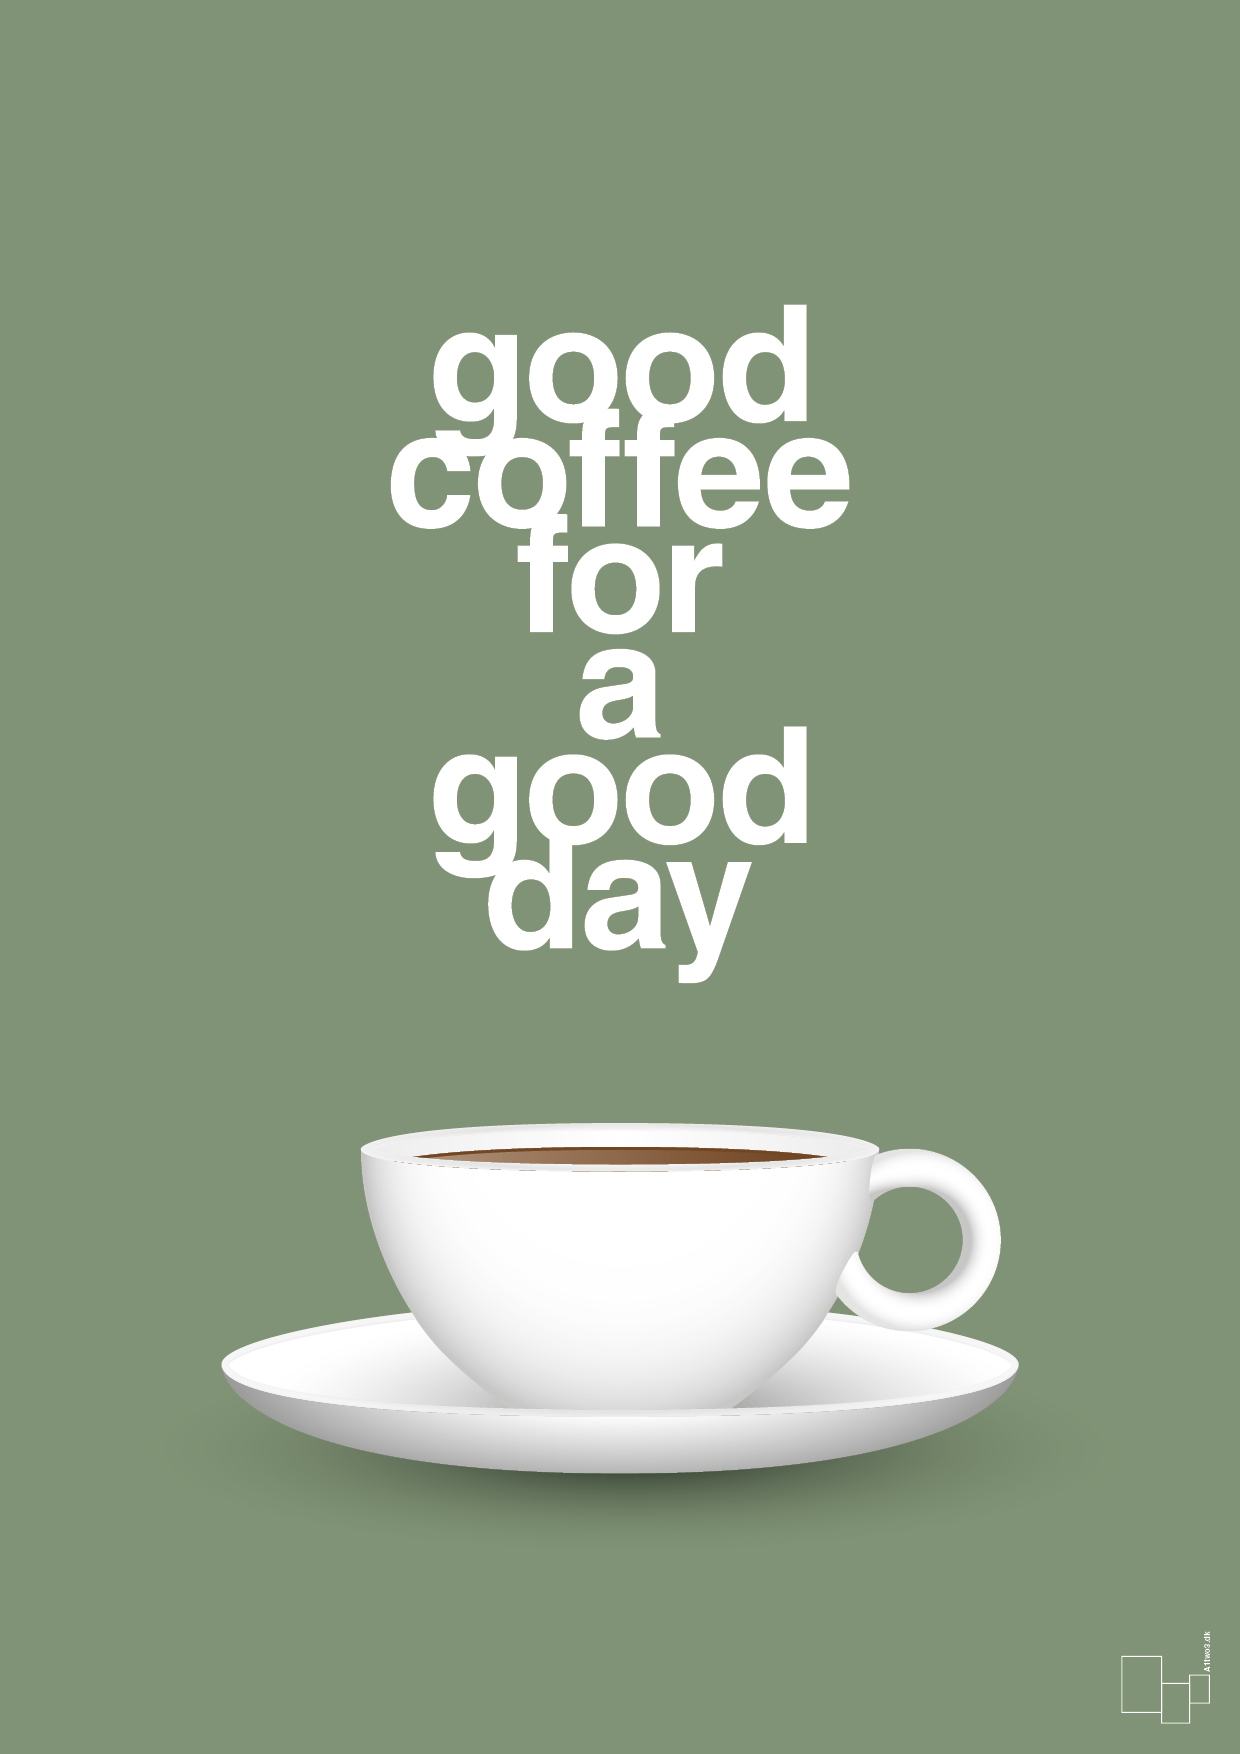 good coffee for a good day - Plakat med Mad & Drikke i Jade